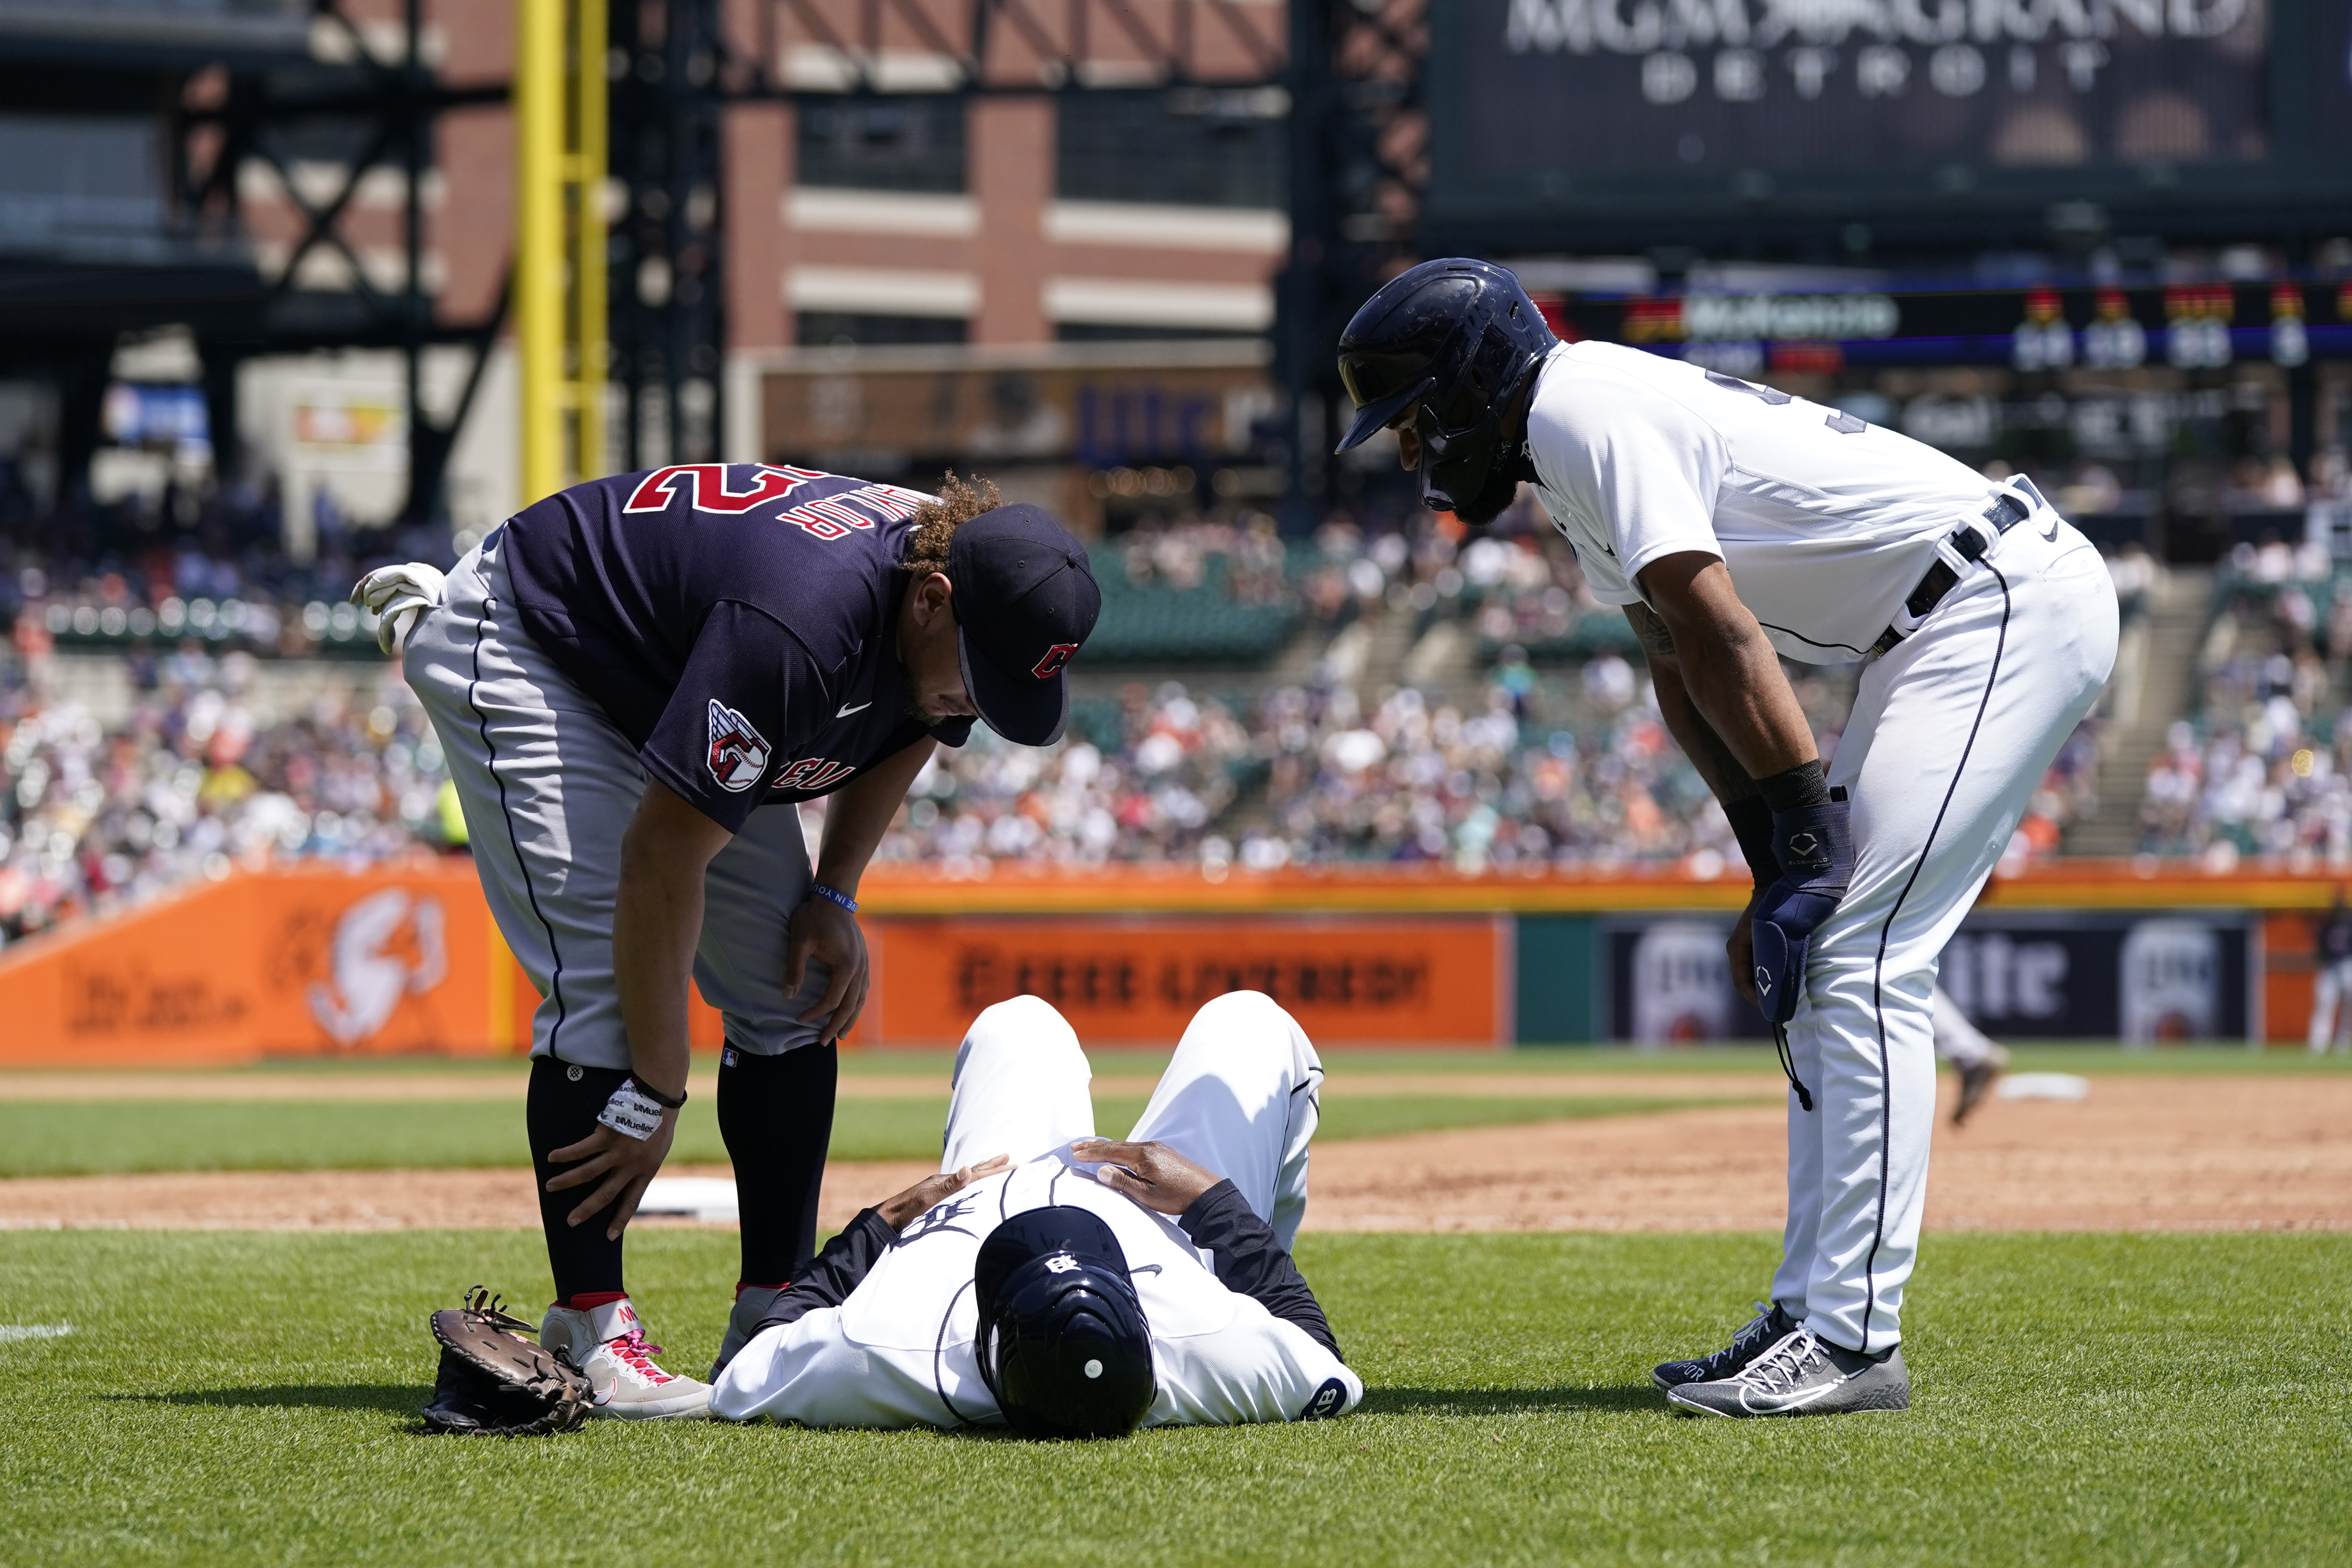 Tigers coach sidelined 4-6 weeks after getting hit by line drive 